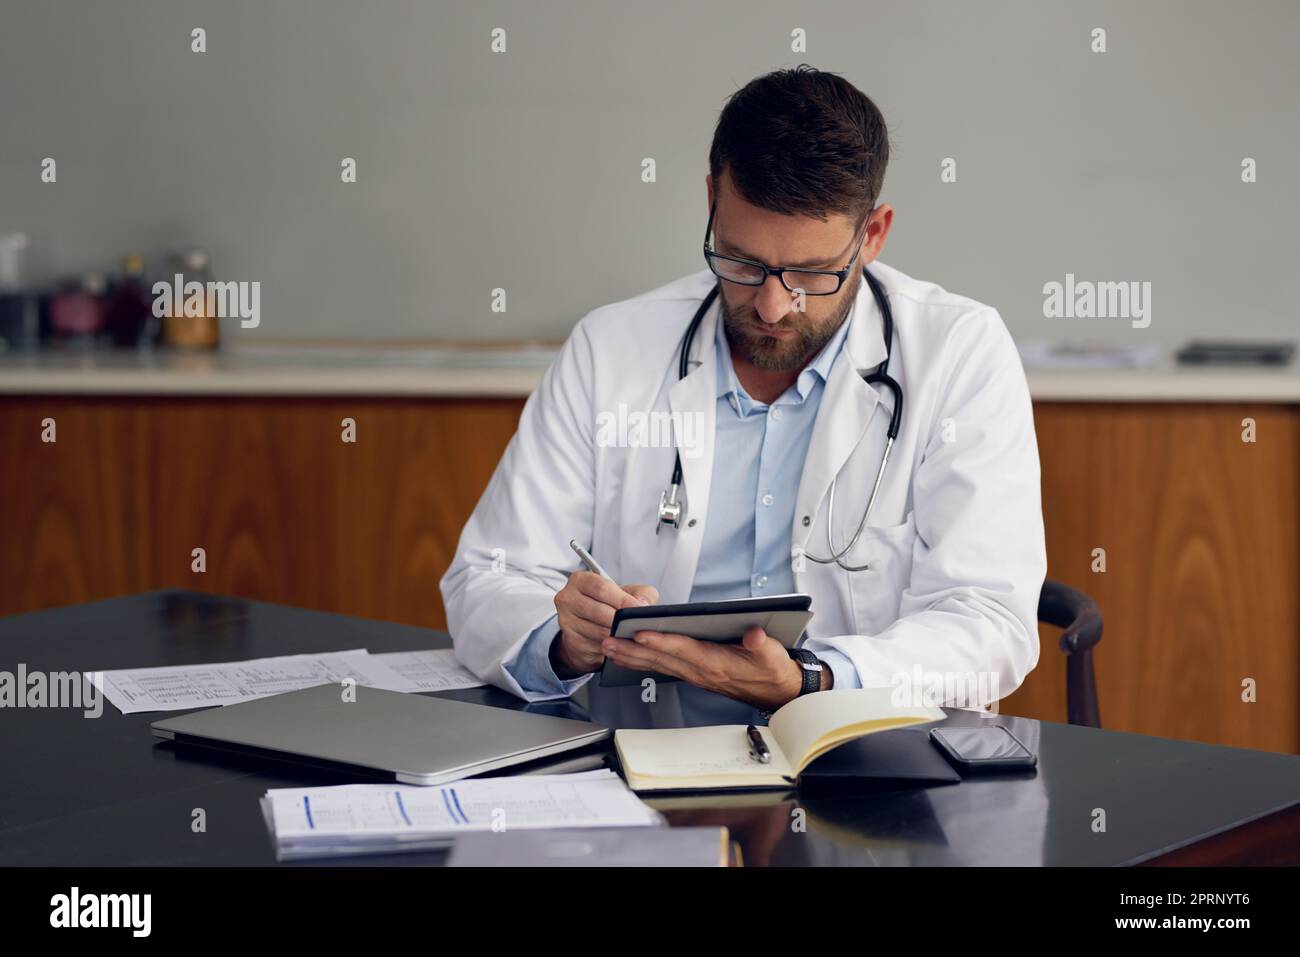 Wireless technology makes record-keeping a breeze. a handsome male doctor working on his tablet while sitting in his office Stock Photo